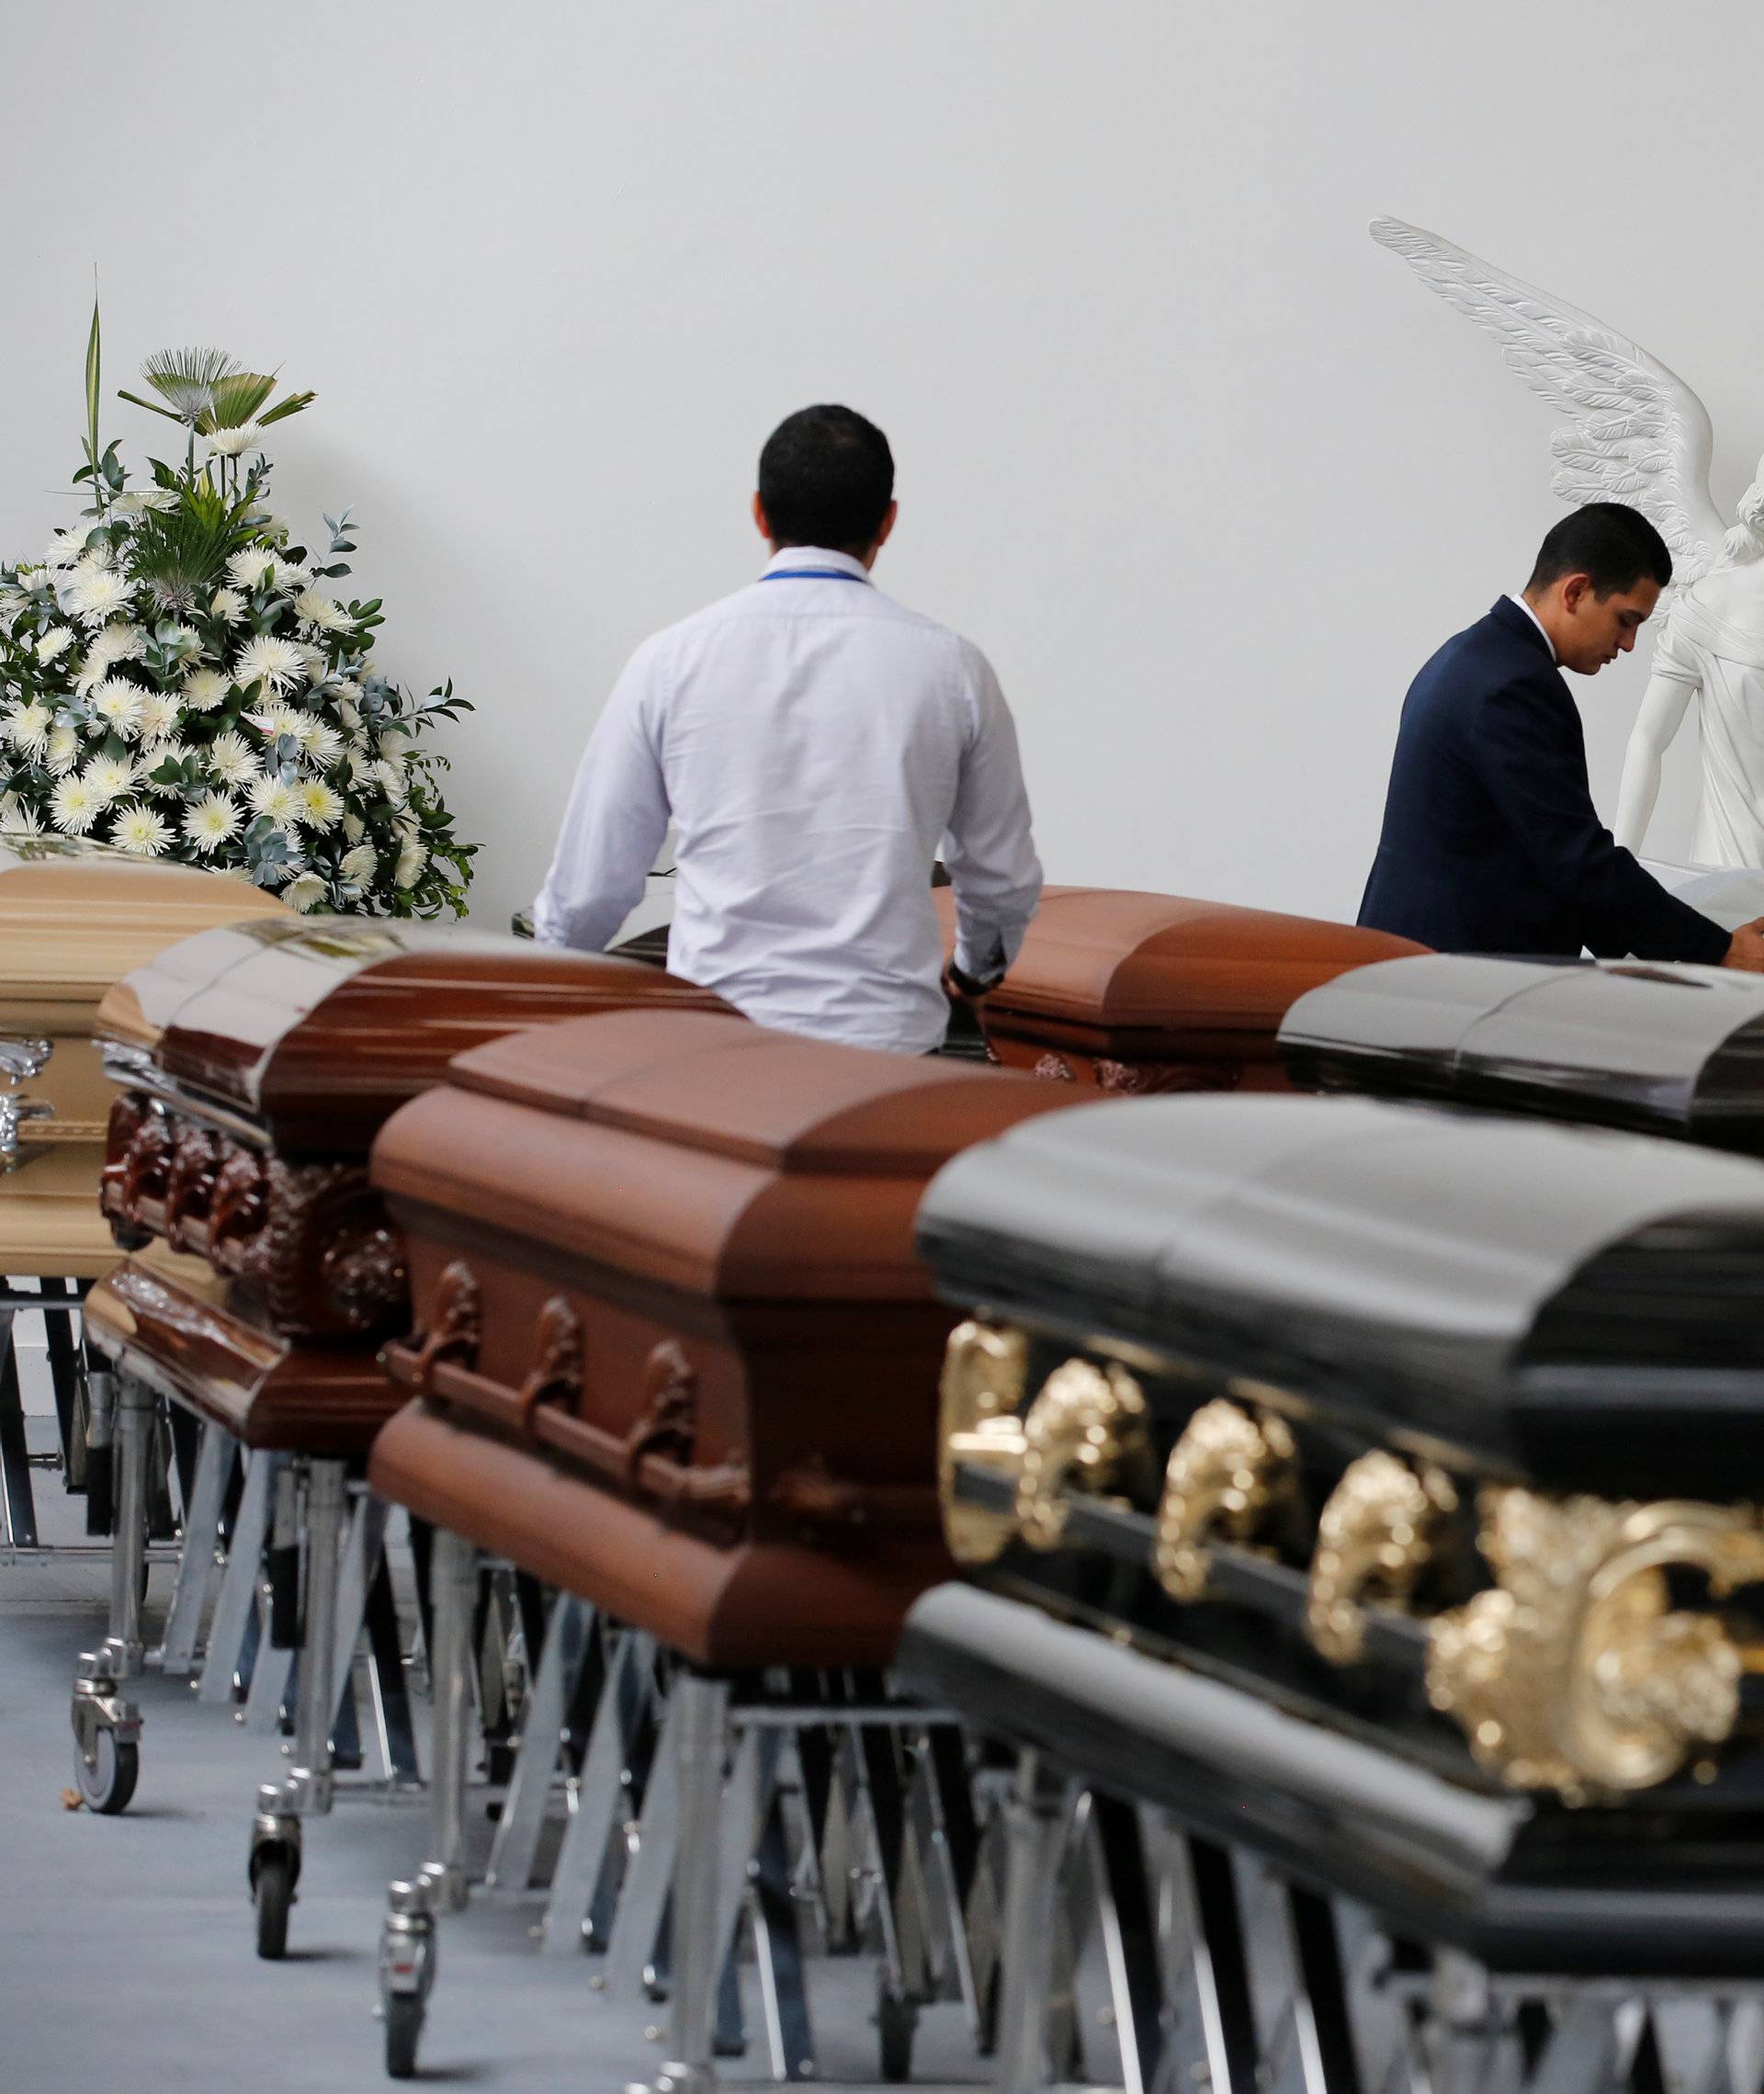 Funeral workers arrange coffins holding the remains of the victims who died in an accident of a plane that crashed into the Colombian jungle with Brazilian soccer team Chapecoense onboard, in Medellin